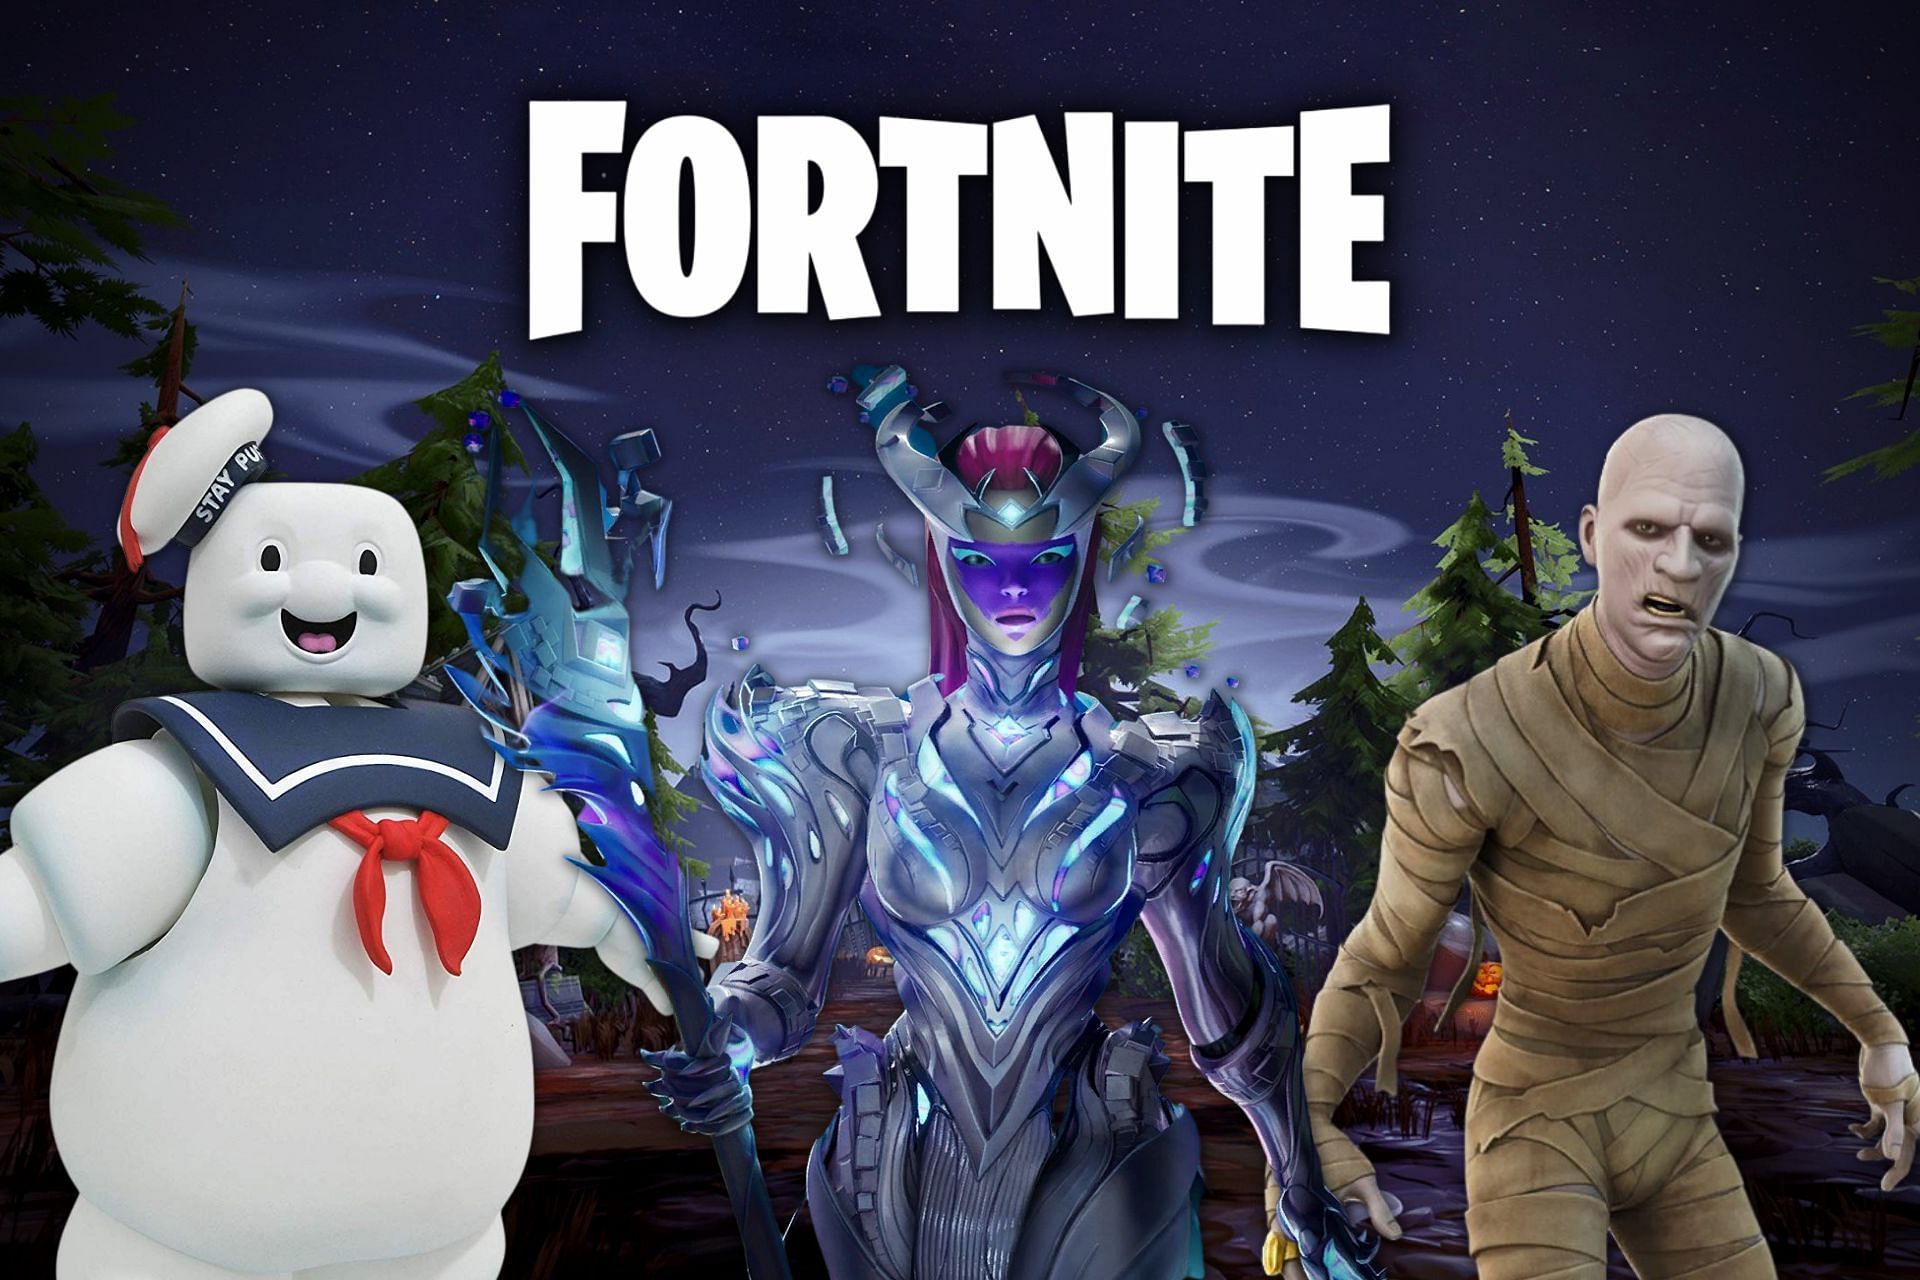 Fortnite update v18.21 welcomes the Cube Queen, Mummy, and Ghostbusters (Image via Sportskeeda)